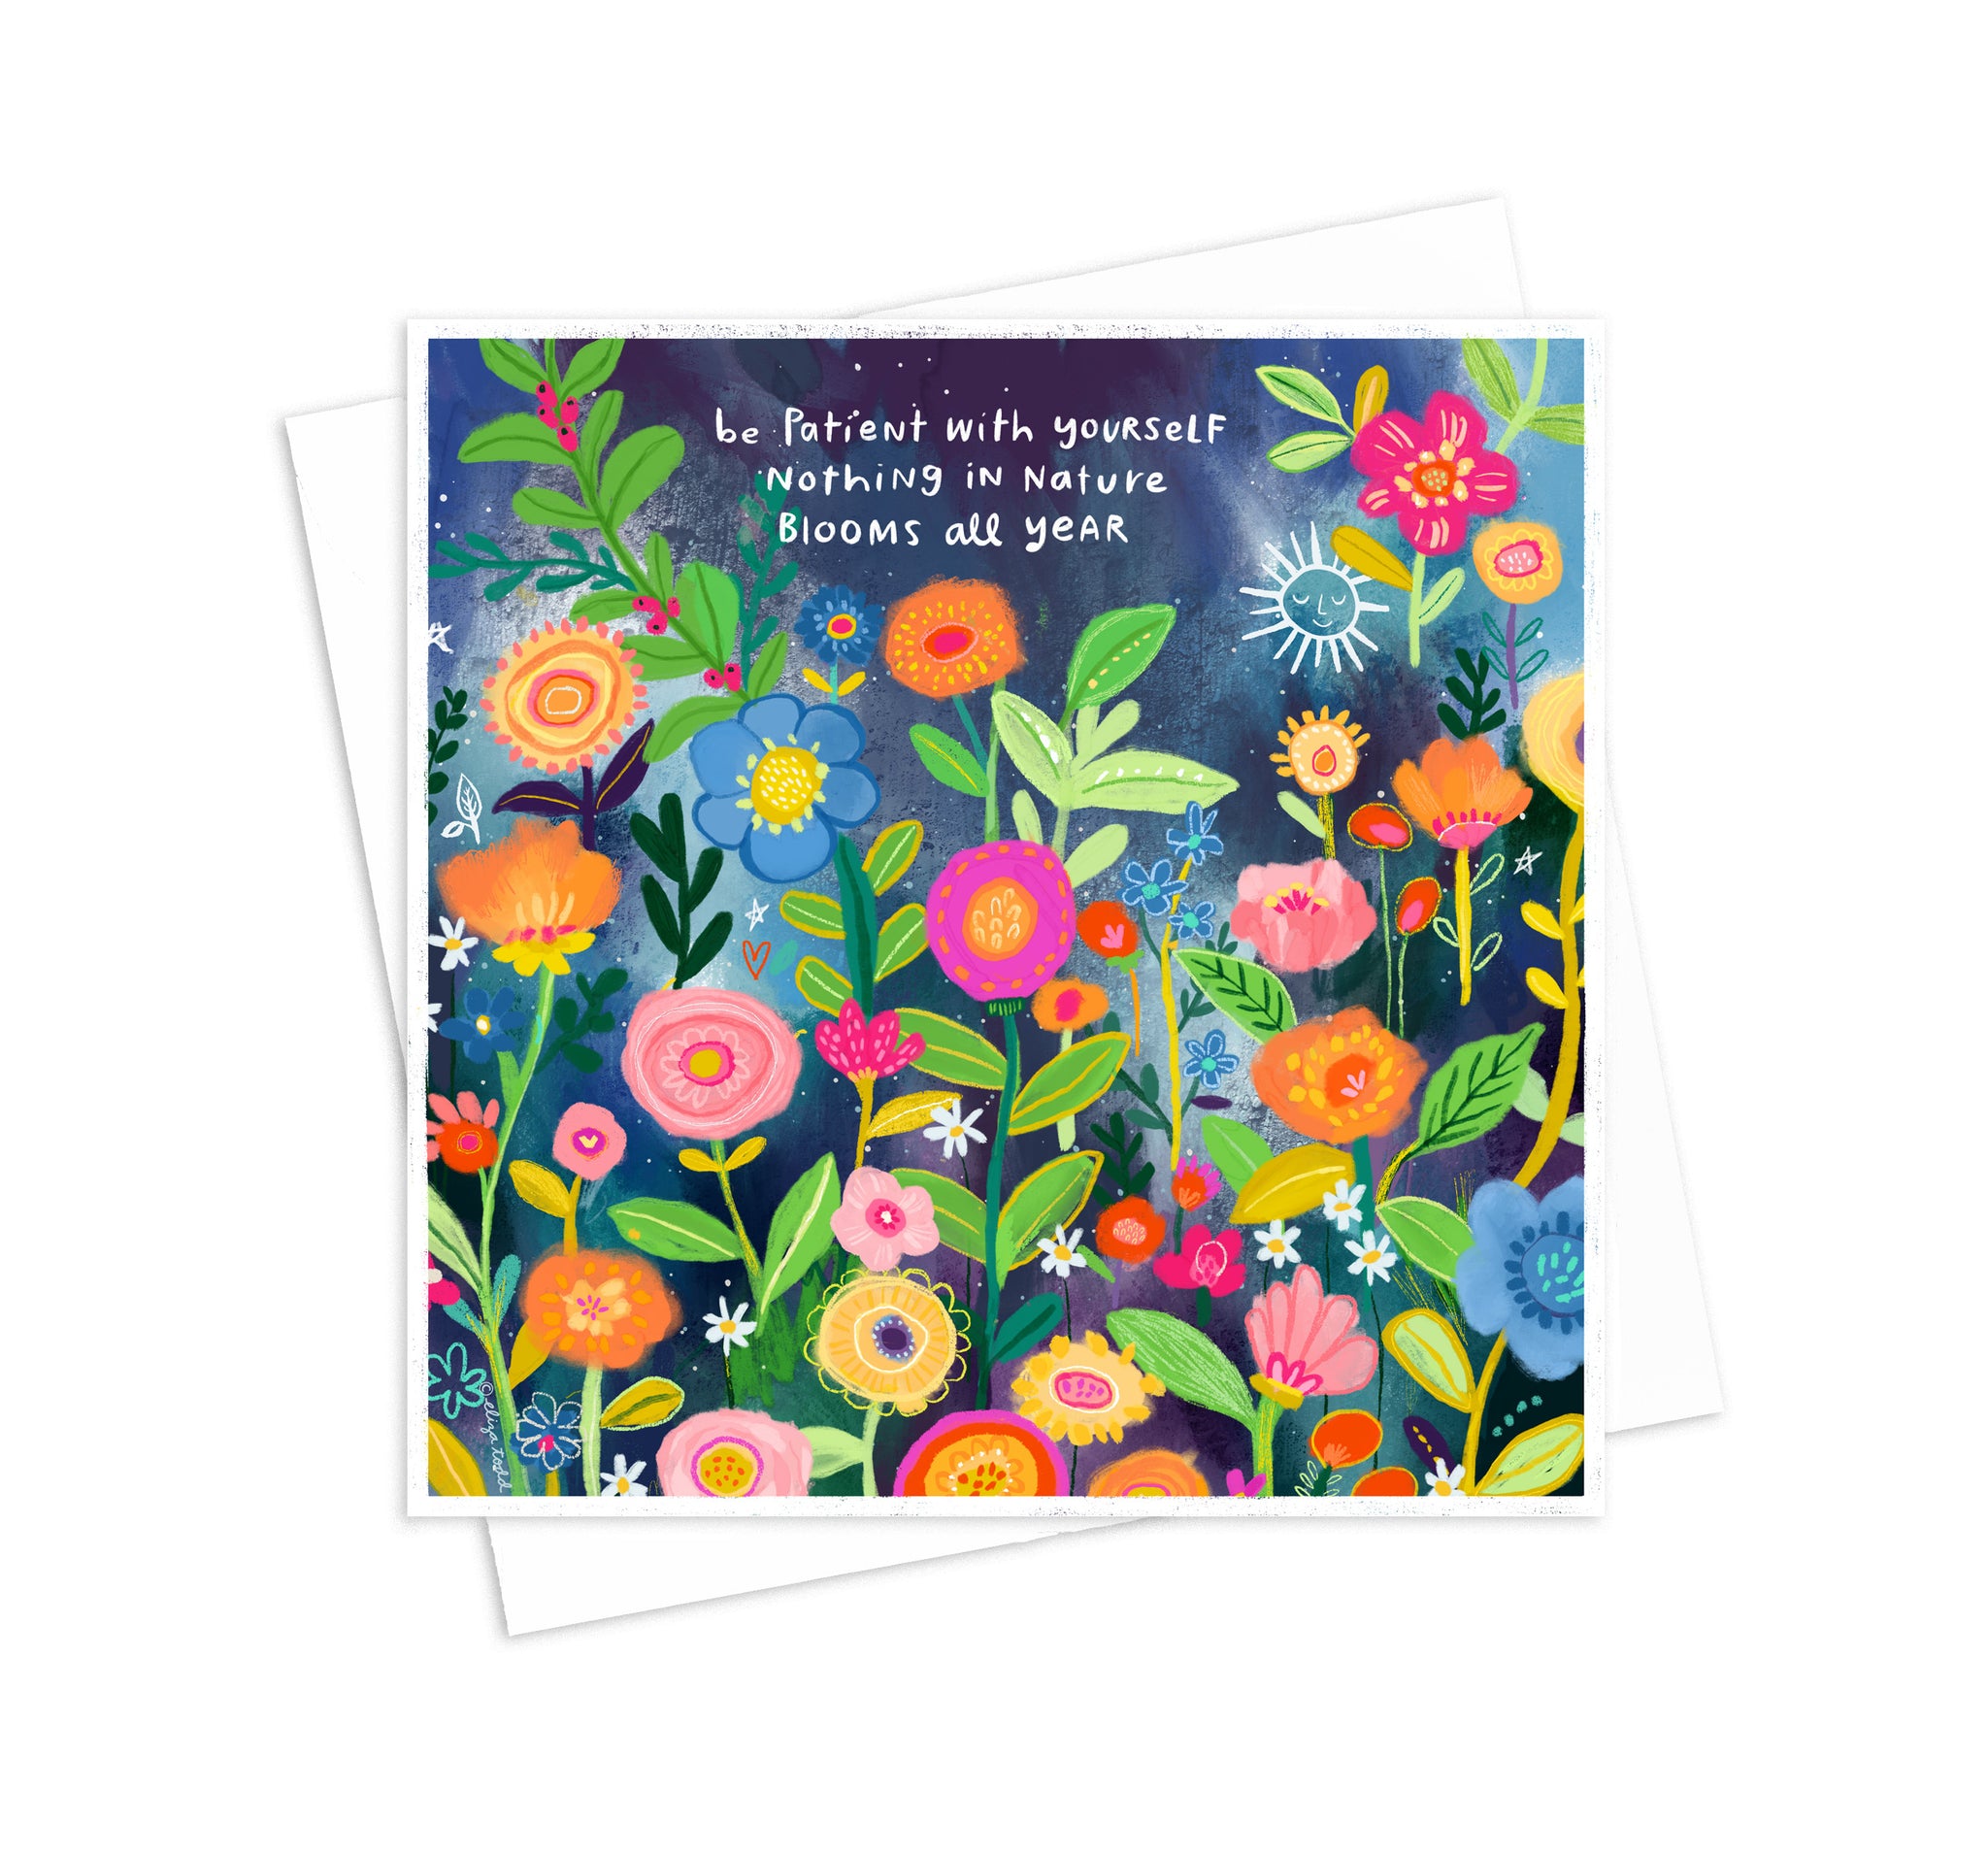 Be Patient with Yourself - 5x5 Inch Square Greeting Card